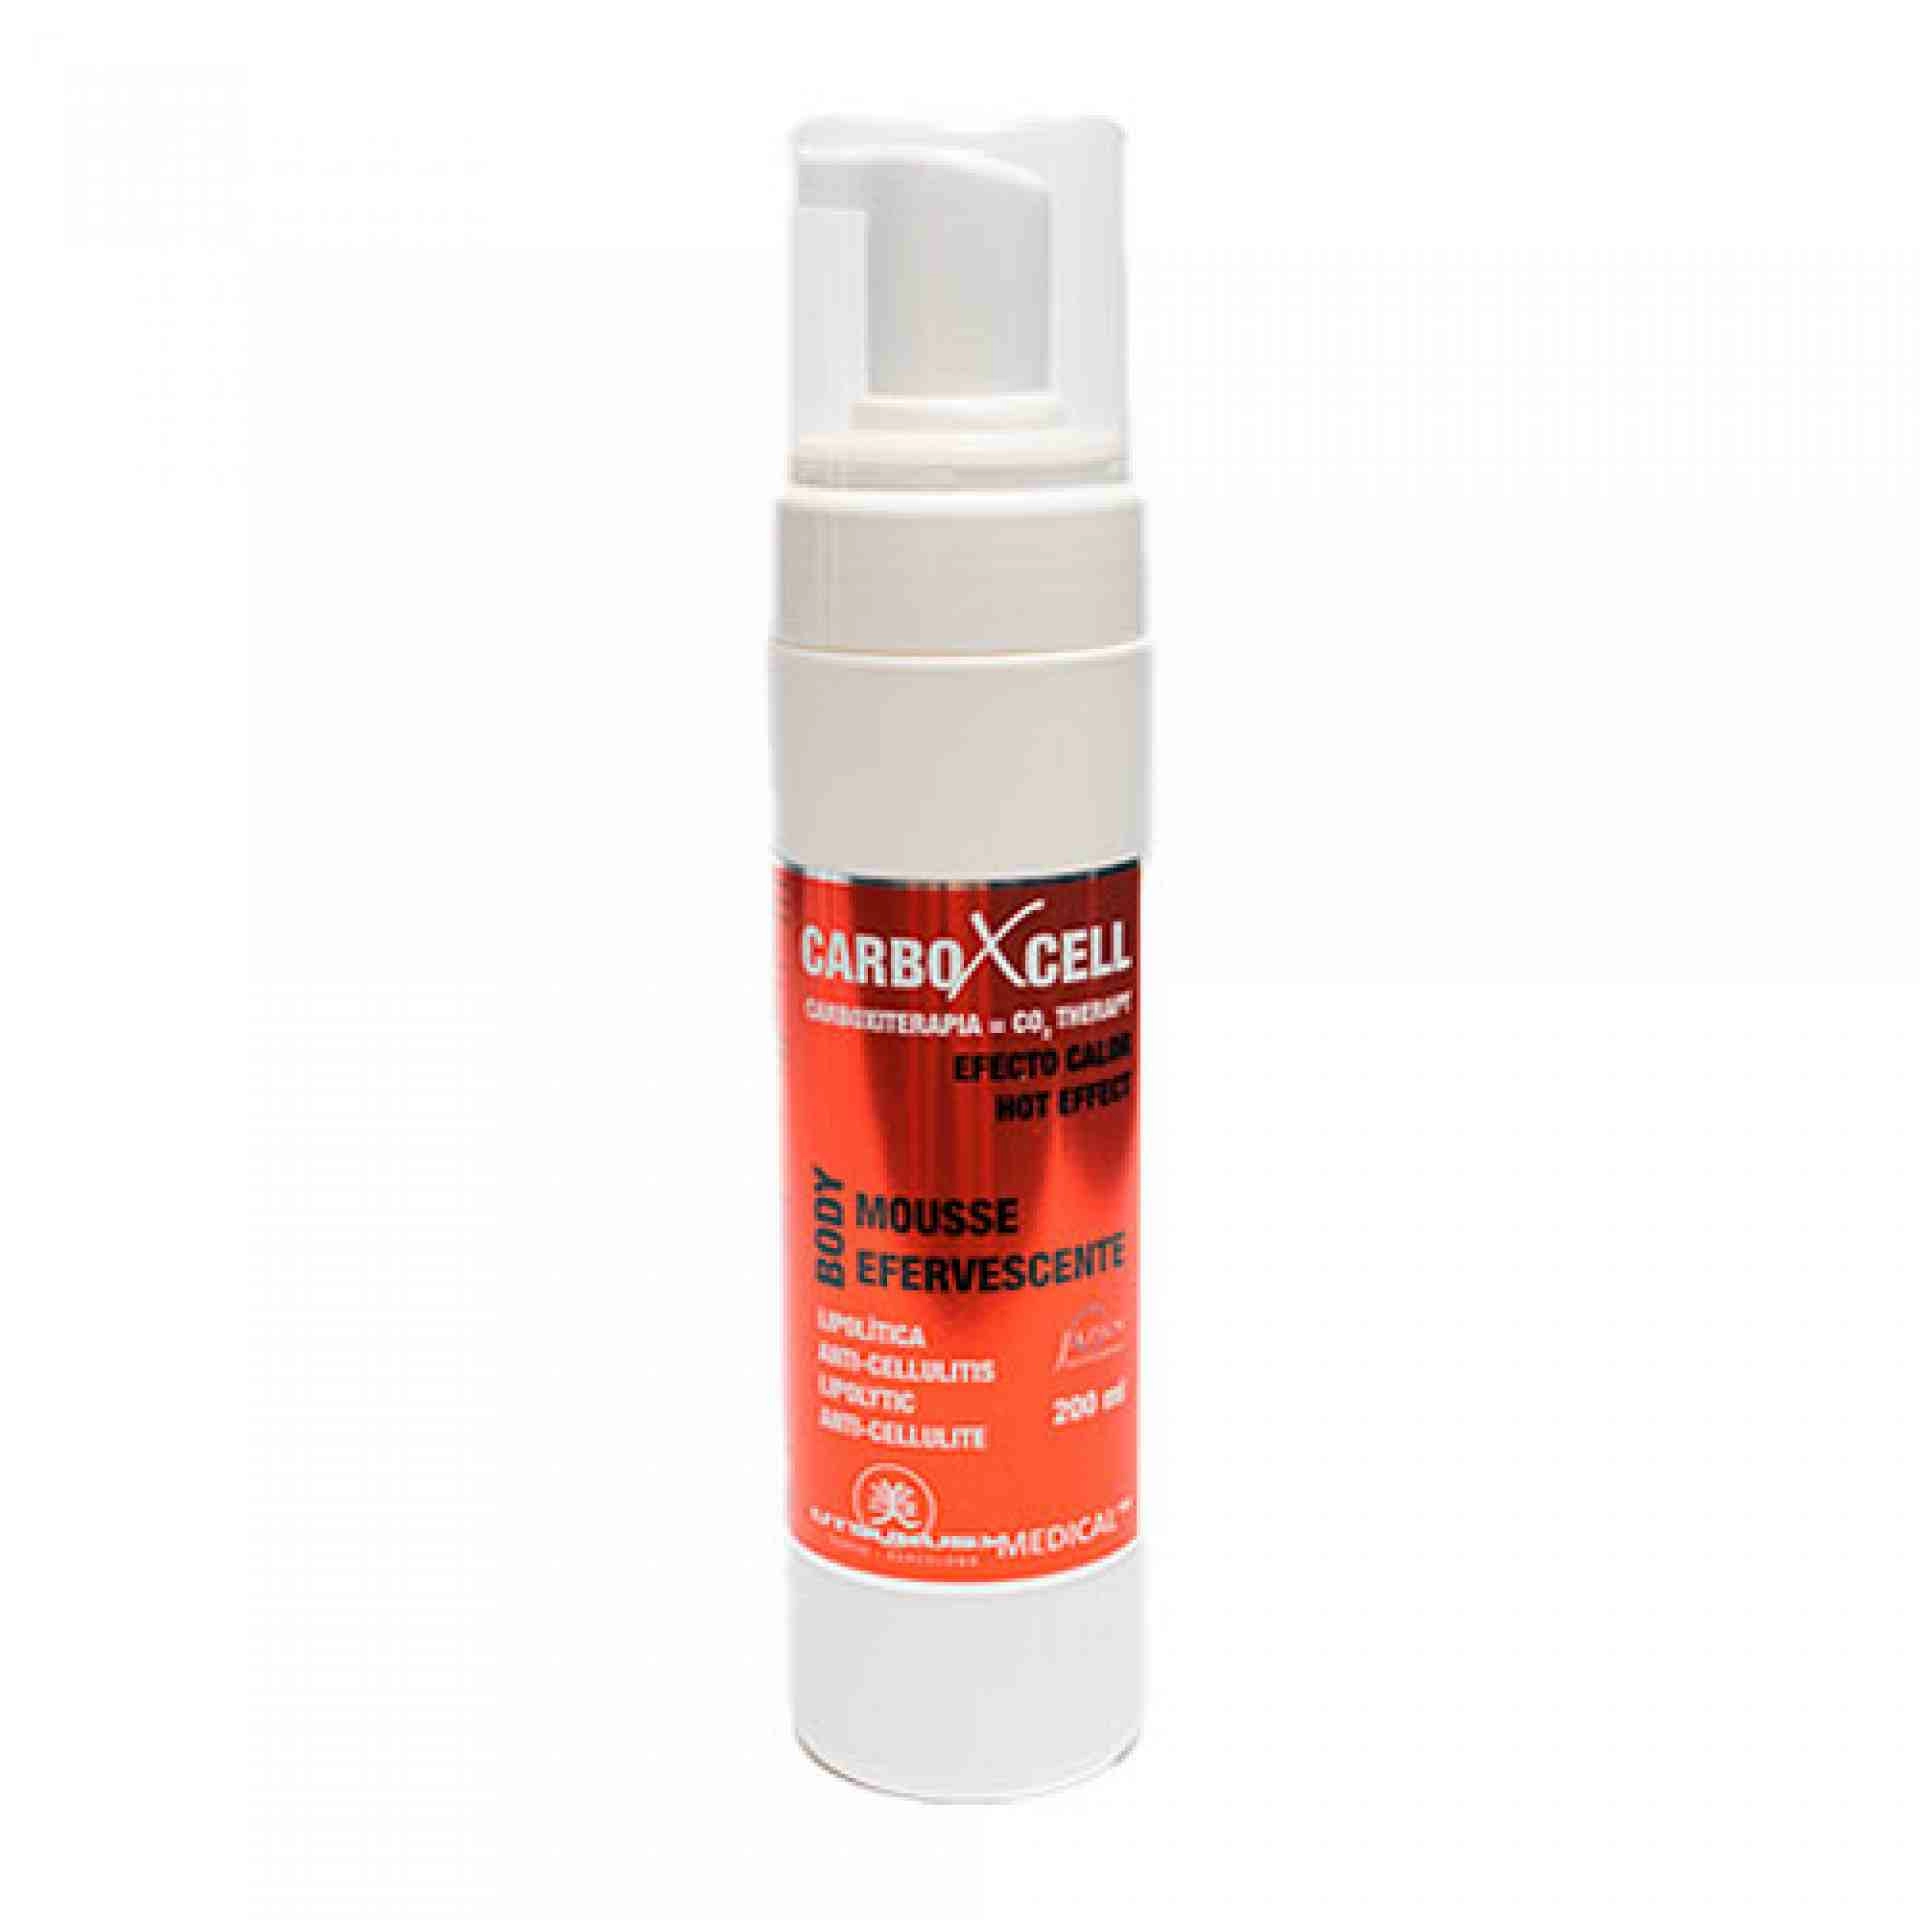 Carboxcell Efecto Calor | Mouse Anticelulítica 200ml - Carboxderm - Utsukusy ®